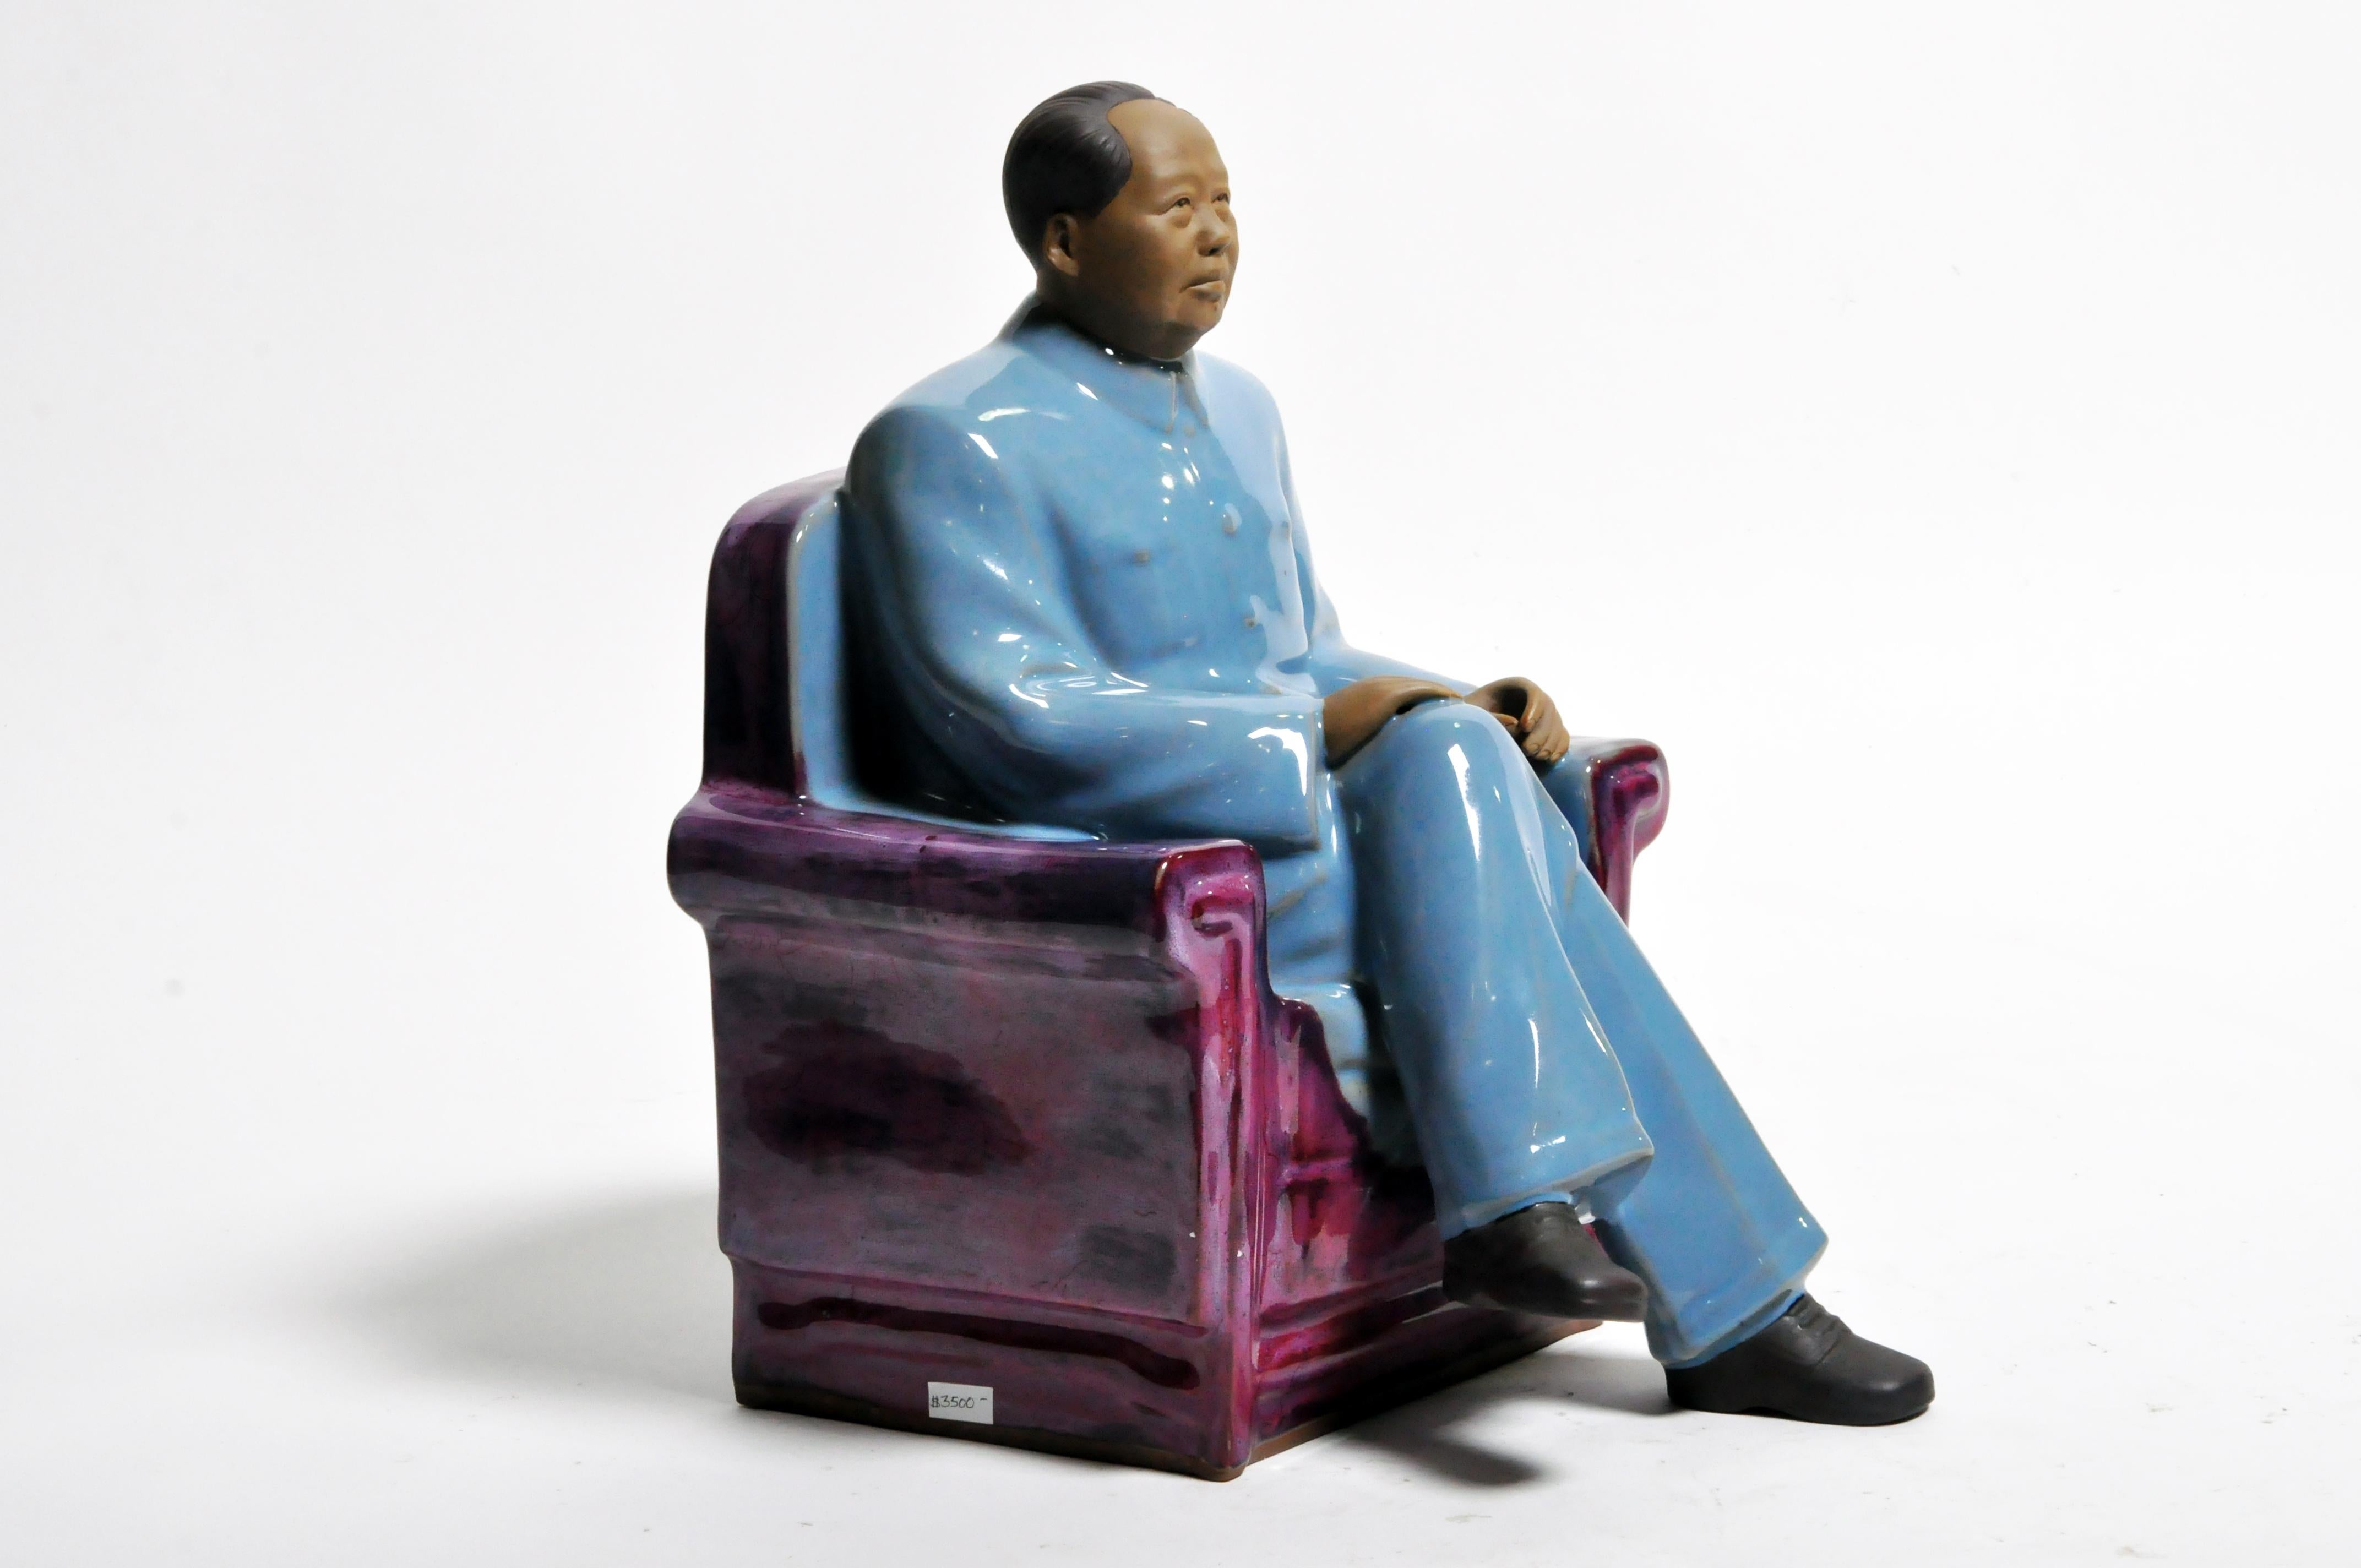 Modern art piece of Mao Zedong (December 26, 1893 – September 9, 1976), also known as Chairman Mao. He was a Chinese communist revolutionary who became the founding father of the People's Republic of China (PRC), which he ruled as the Chairman of